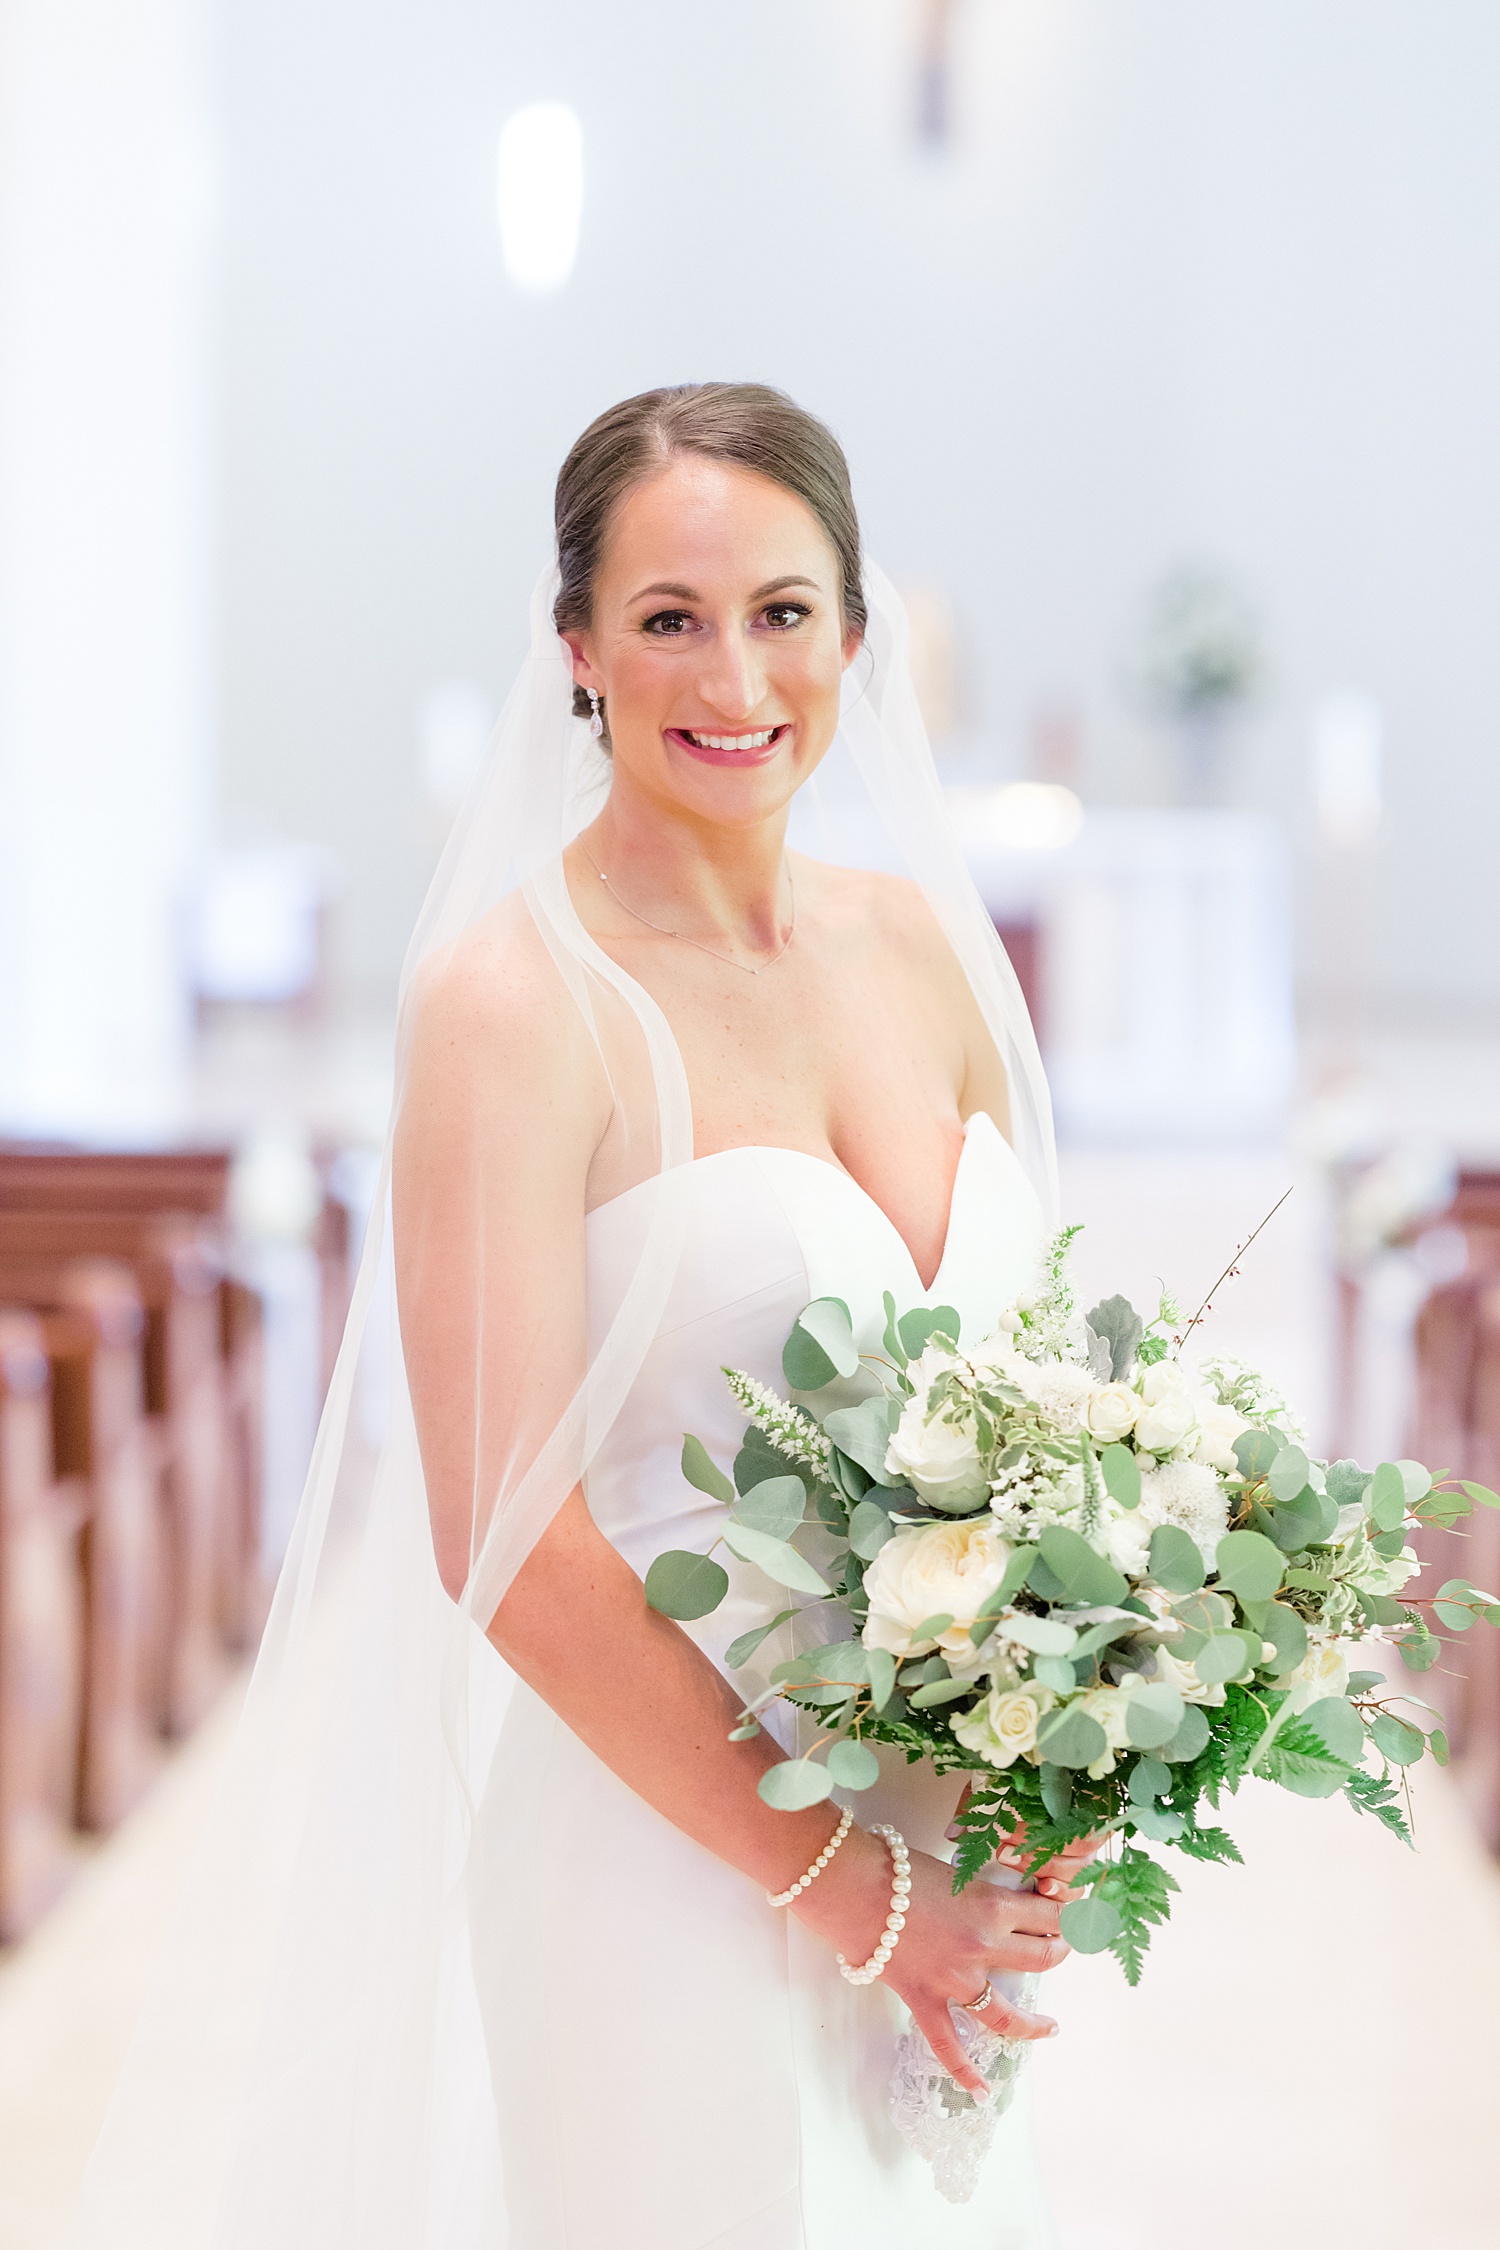 classic bridal portraits in church holding classic white bouquet with greenery